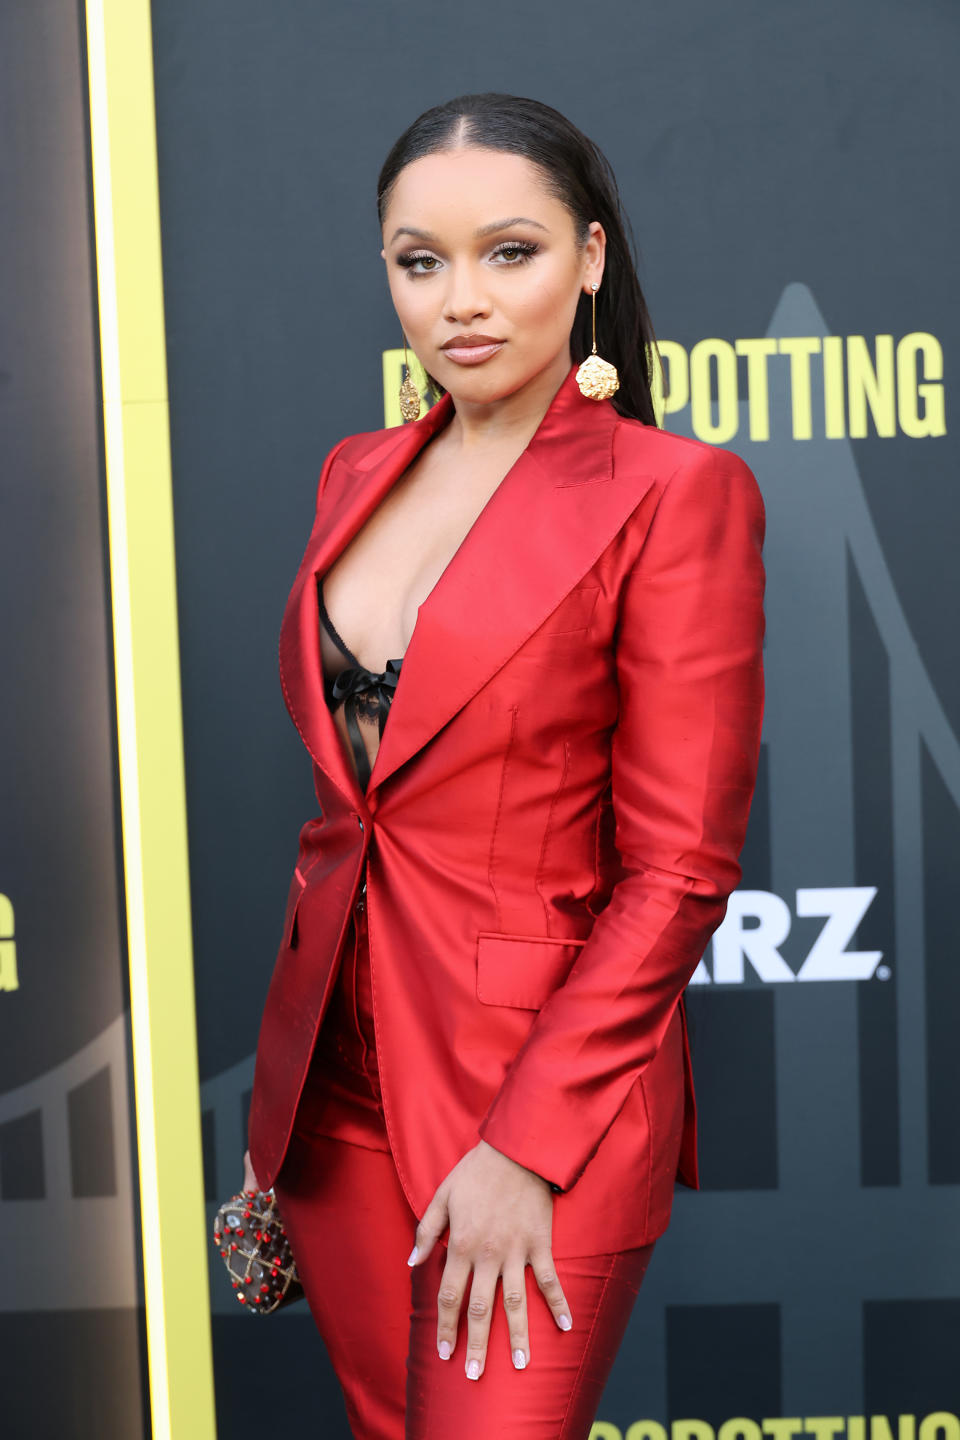 What they're up to now: Jaylen landed a major role starring alongside Jasmine Cephas Jones in the Starz series Blindspotting. The show, which ran for two seasons, finished its run earlier this year.